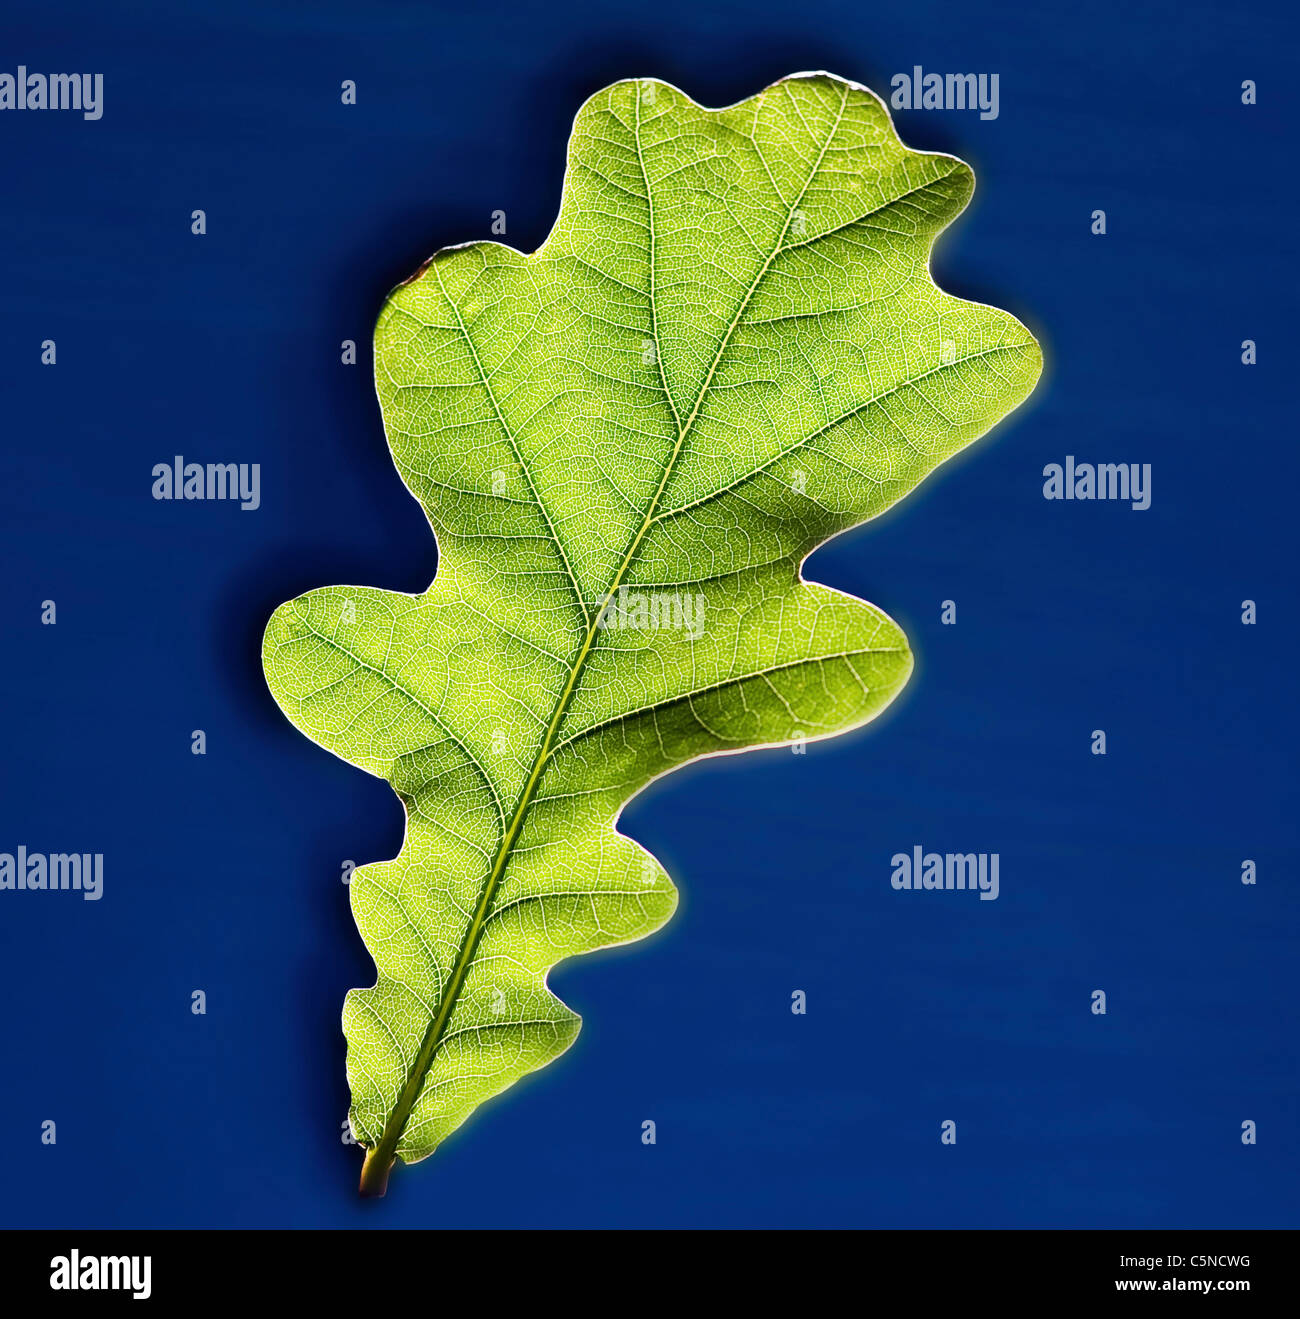 A green leaf on a blue surface Stock Photo